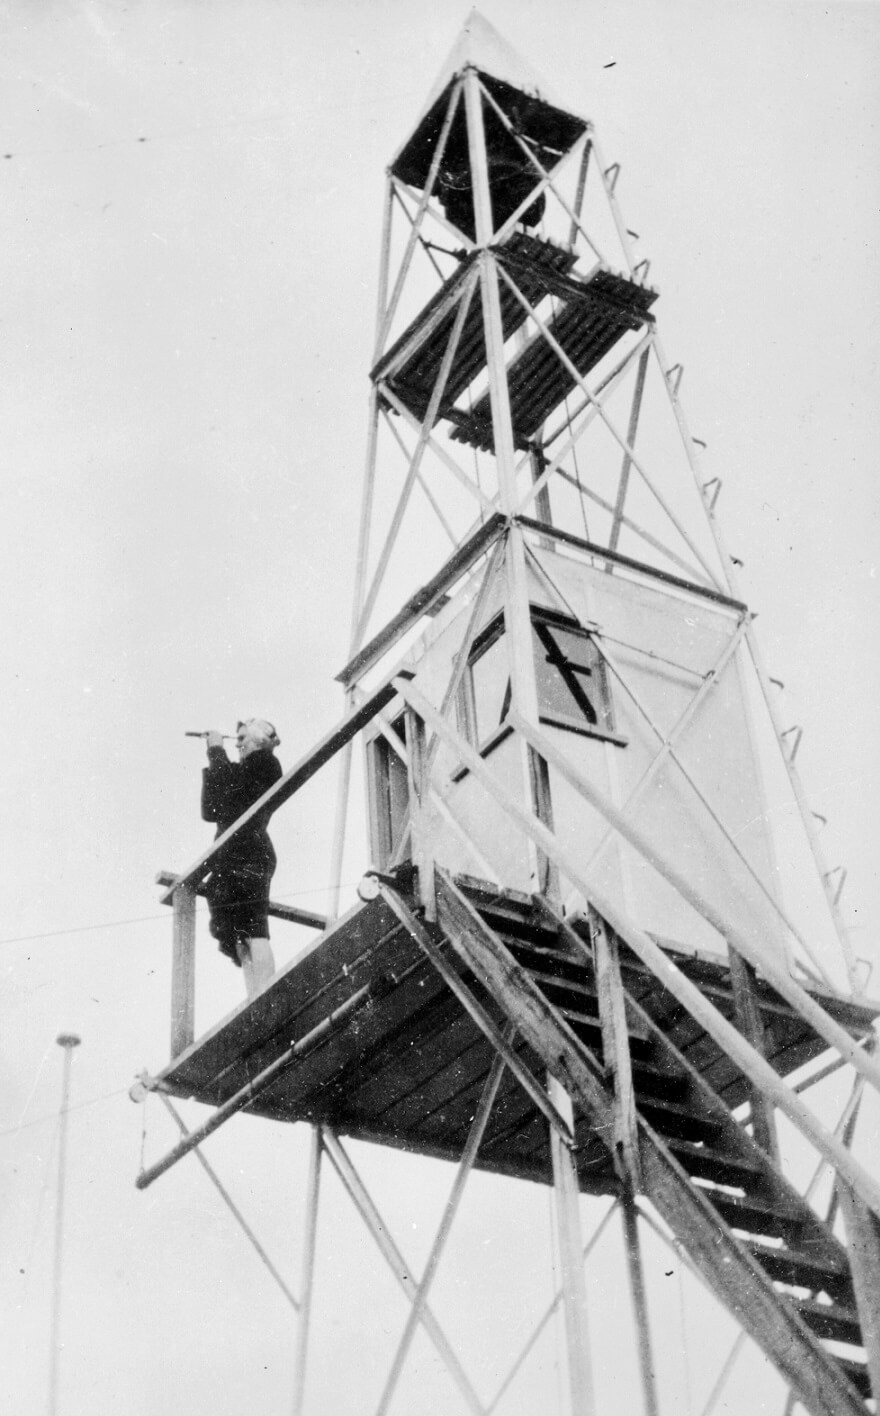 black and white photograph shows a tall simply constructed fire tower with narrow stairs leading up to a platform with an enclosed room (approx 1 metre sqaure). A woman stands in a corner of this platform near a rail with a spyglass to her eye. She is wearing a dark suit jacket and skirt. 